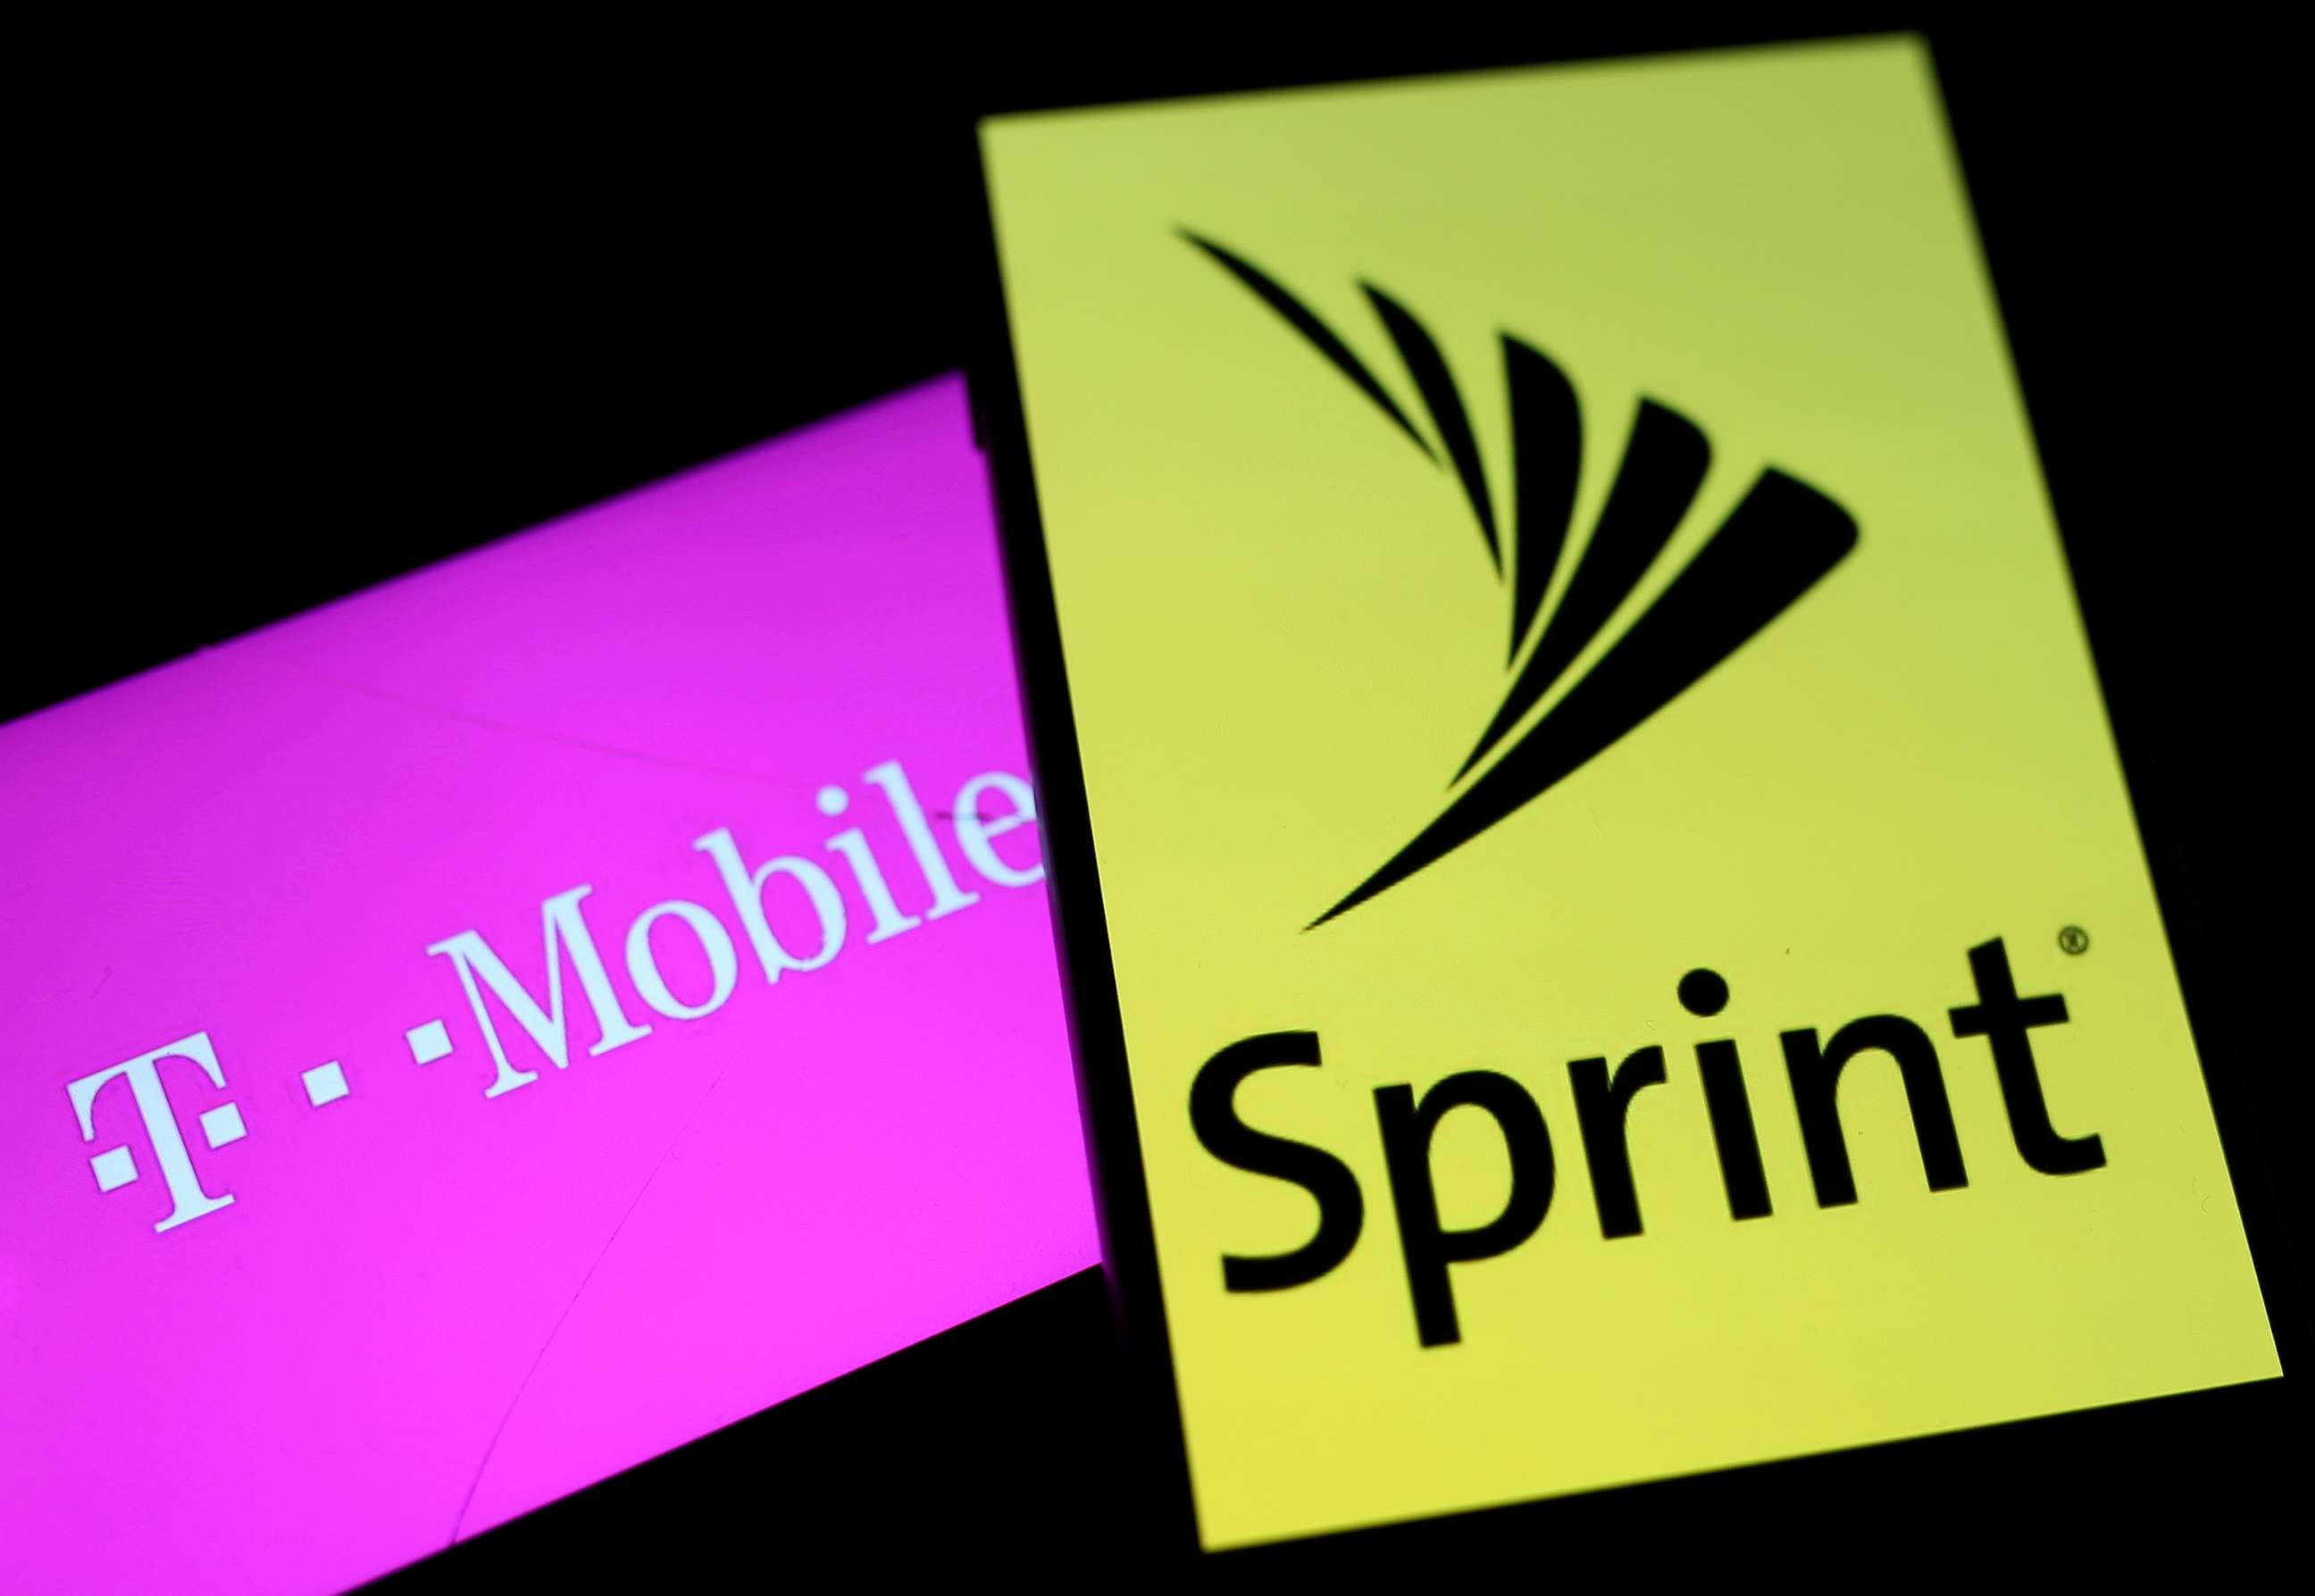 PHOTO: An illustration depicts smartphones with the logos of T-Mobile and Sprint, Sept. 19, 2017. 